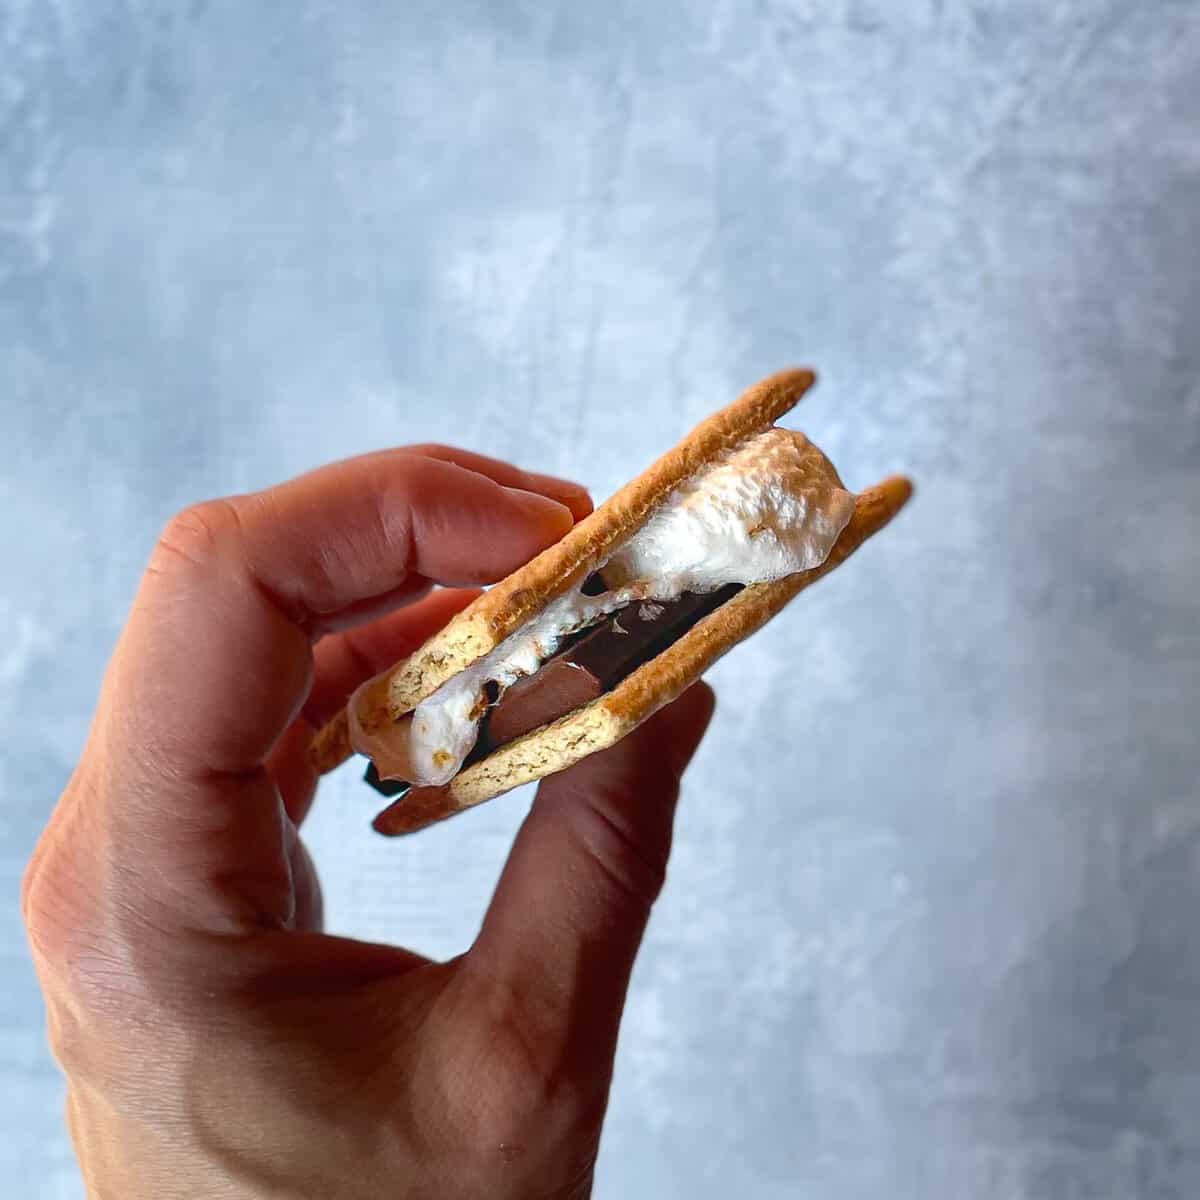 hand holding a smore with oozing marshmallow, melted chocolate, and graham crackers.